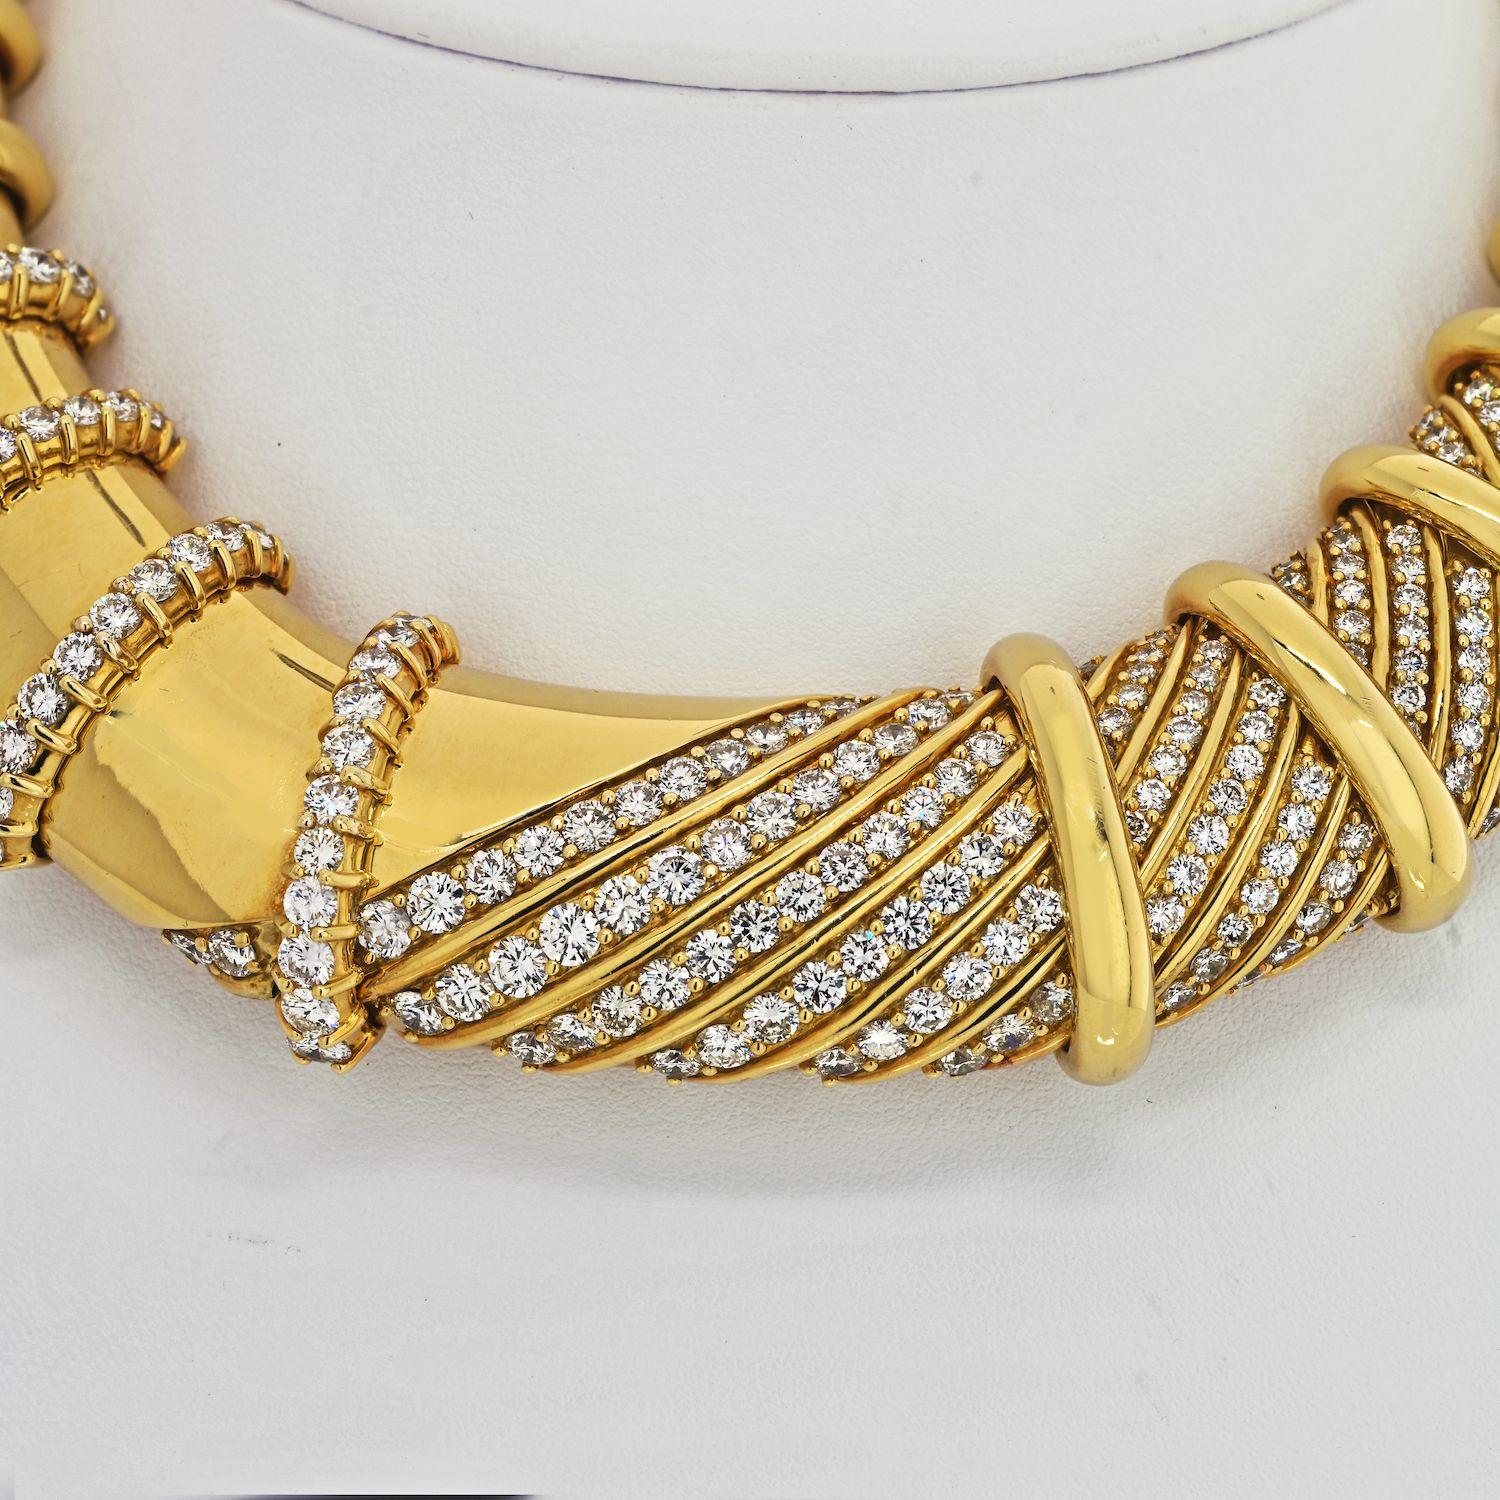 Fluted, arched link gold collar necklace, with prong-set, circular-cut diamonds set to the front, the diamonds weighing approximately 25 total carats, mounted in 18k yellow gold, signed Jose Hess. 15